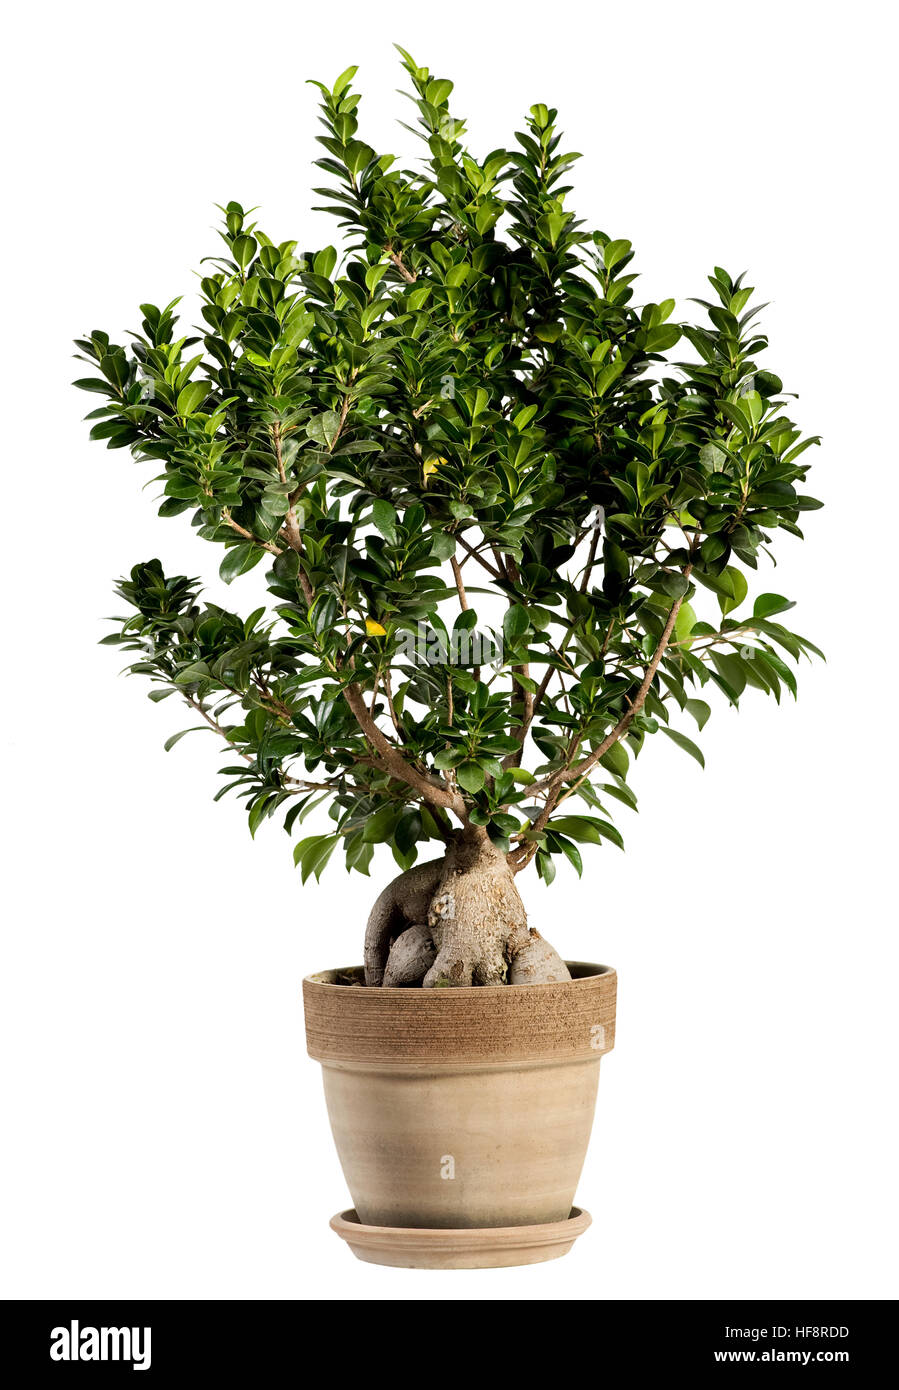 Fresh Look of Ginseng Ficus Bonsai Tree on Ordinary Brown Pot. Isolated on White Background. Stock Photo